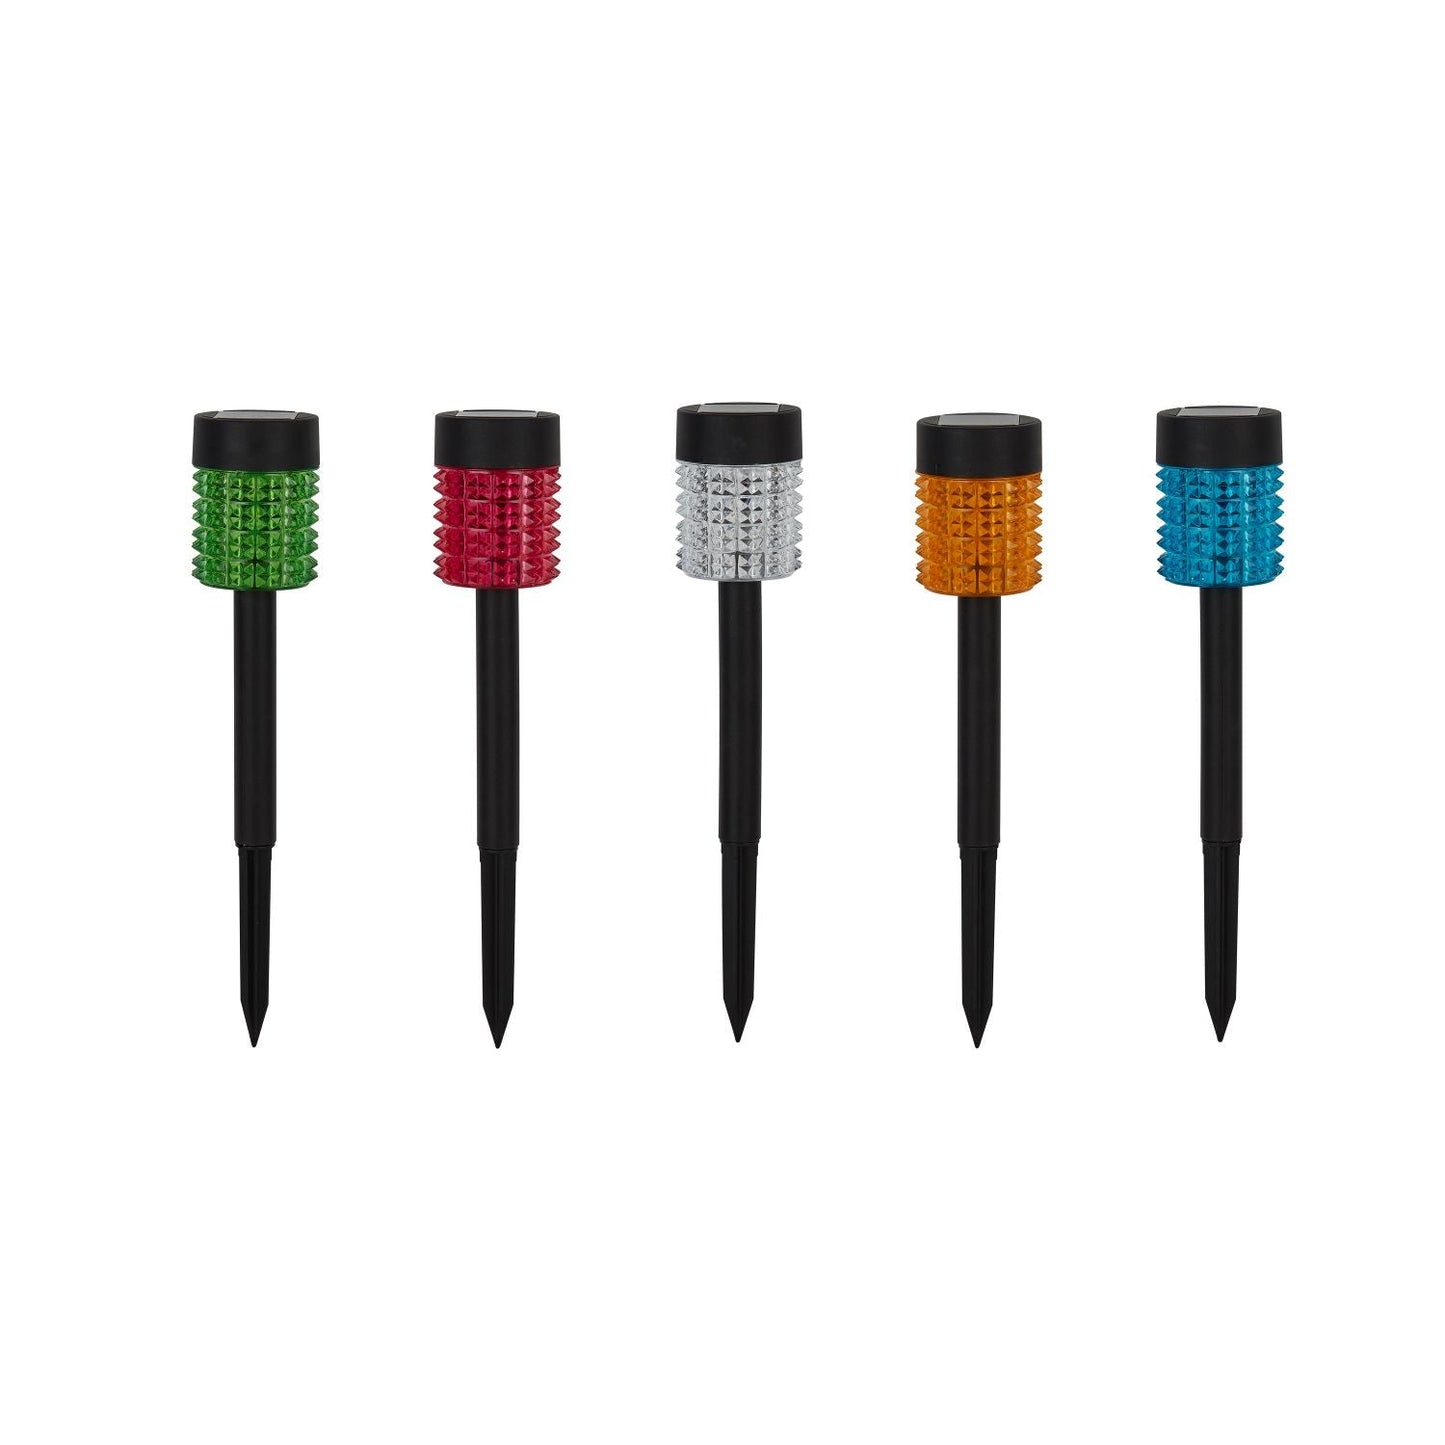 Multicolour Outdoor Solar LED Stake Lights (Set of 5)